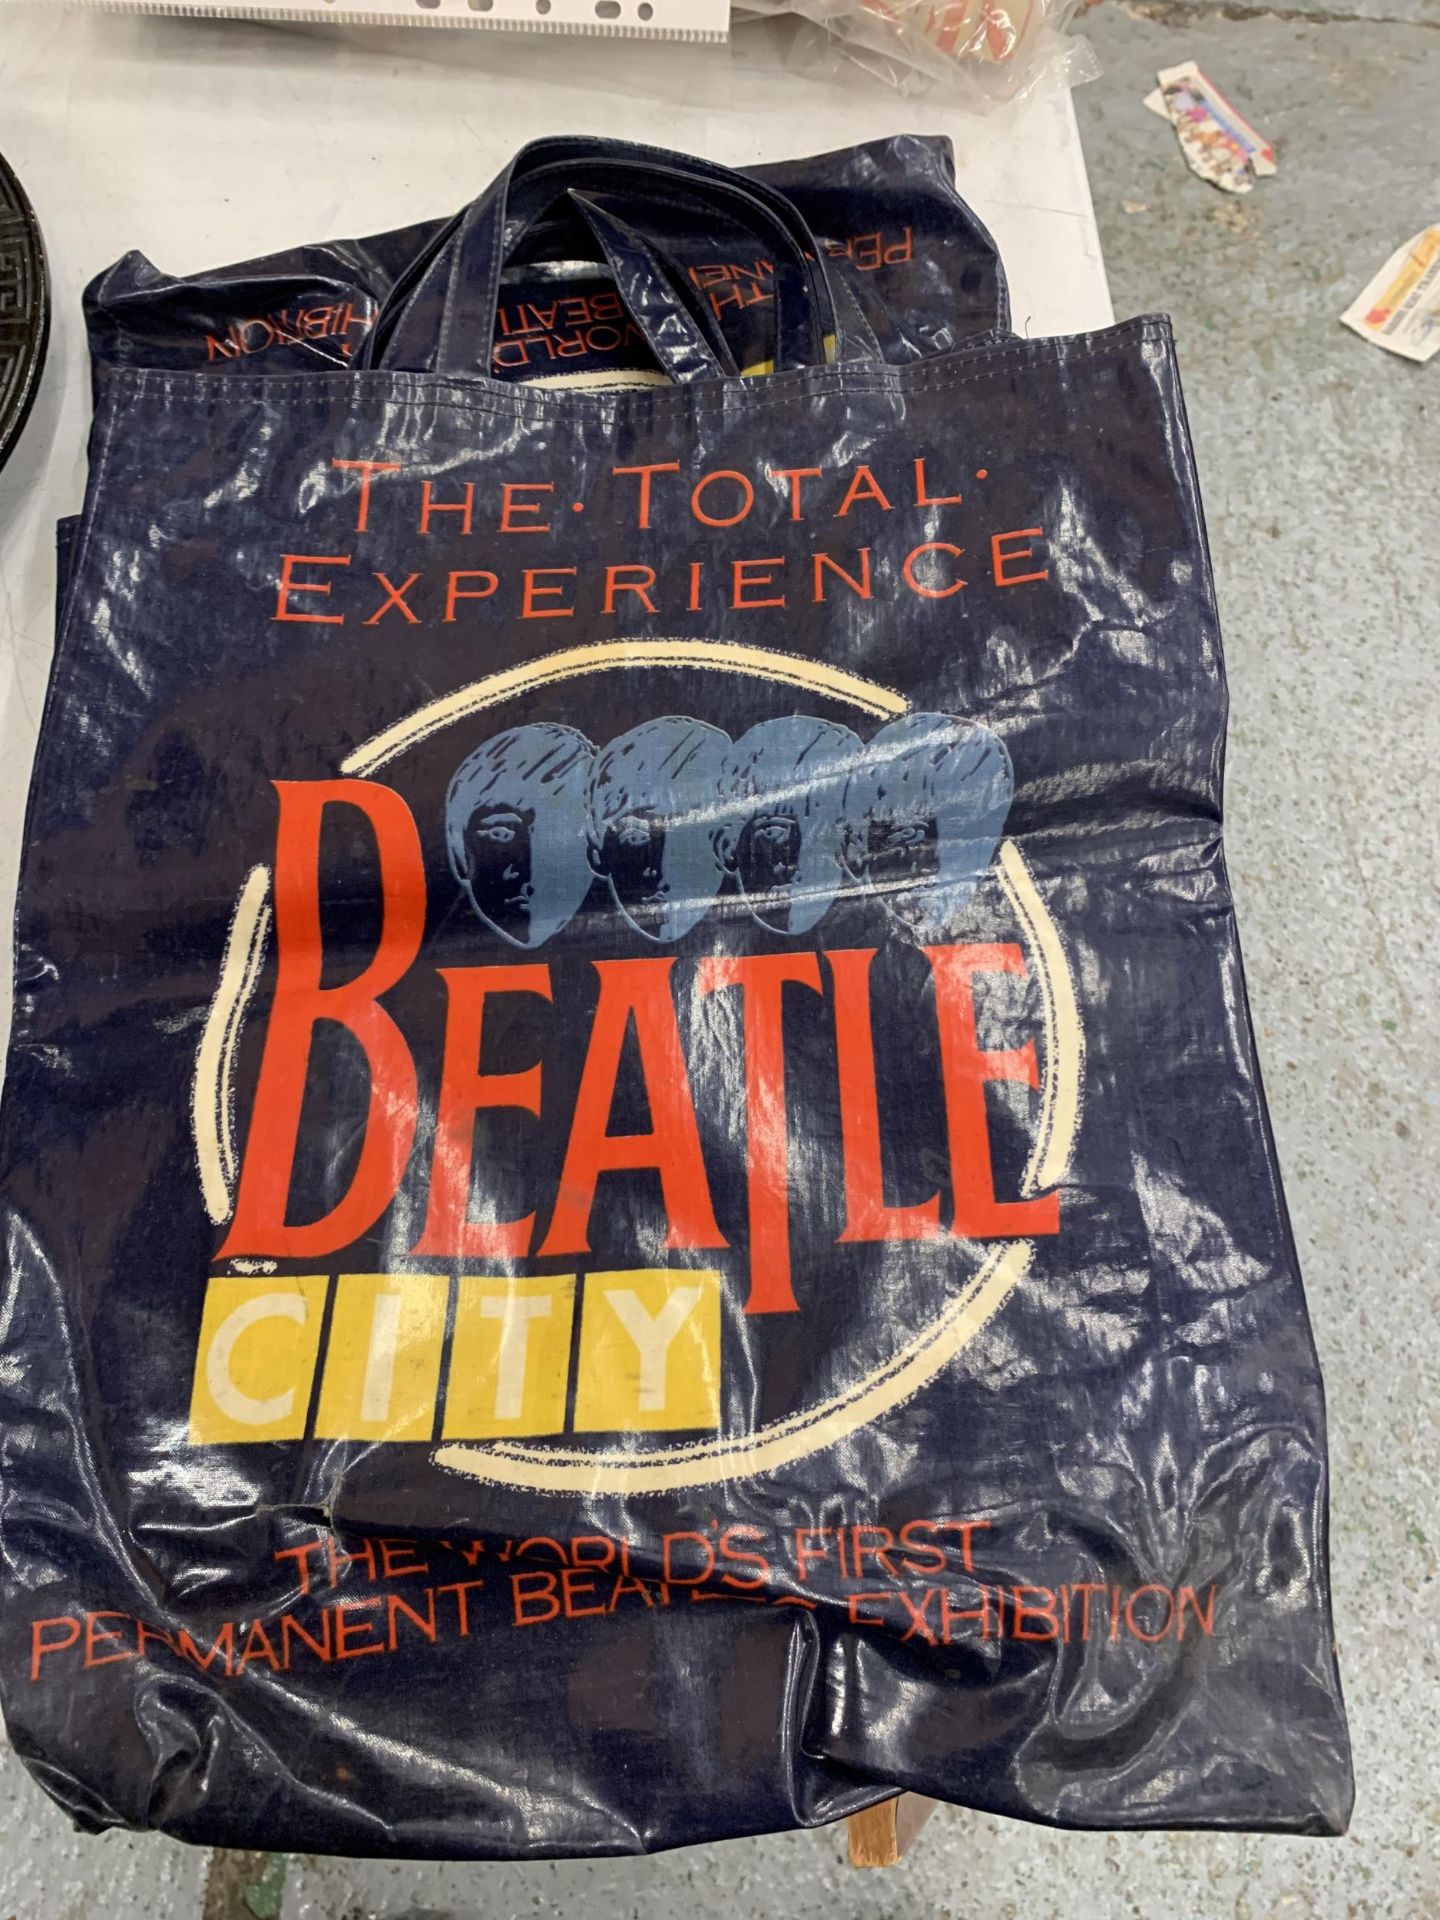 TWO BEATLES THE TOTAL EXPERIENCE BAGS - Image 2 of 2